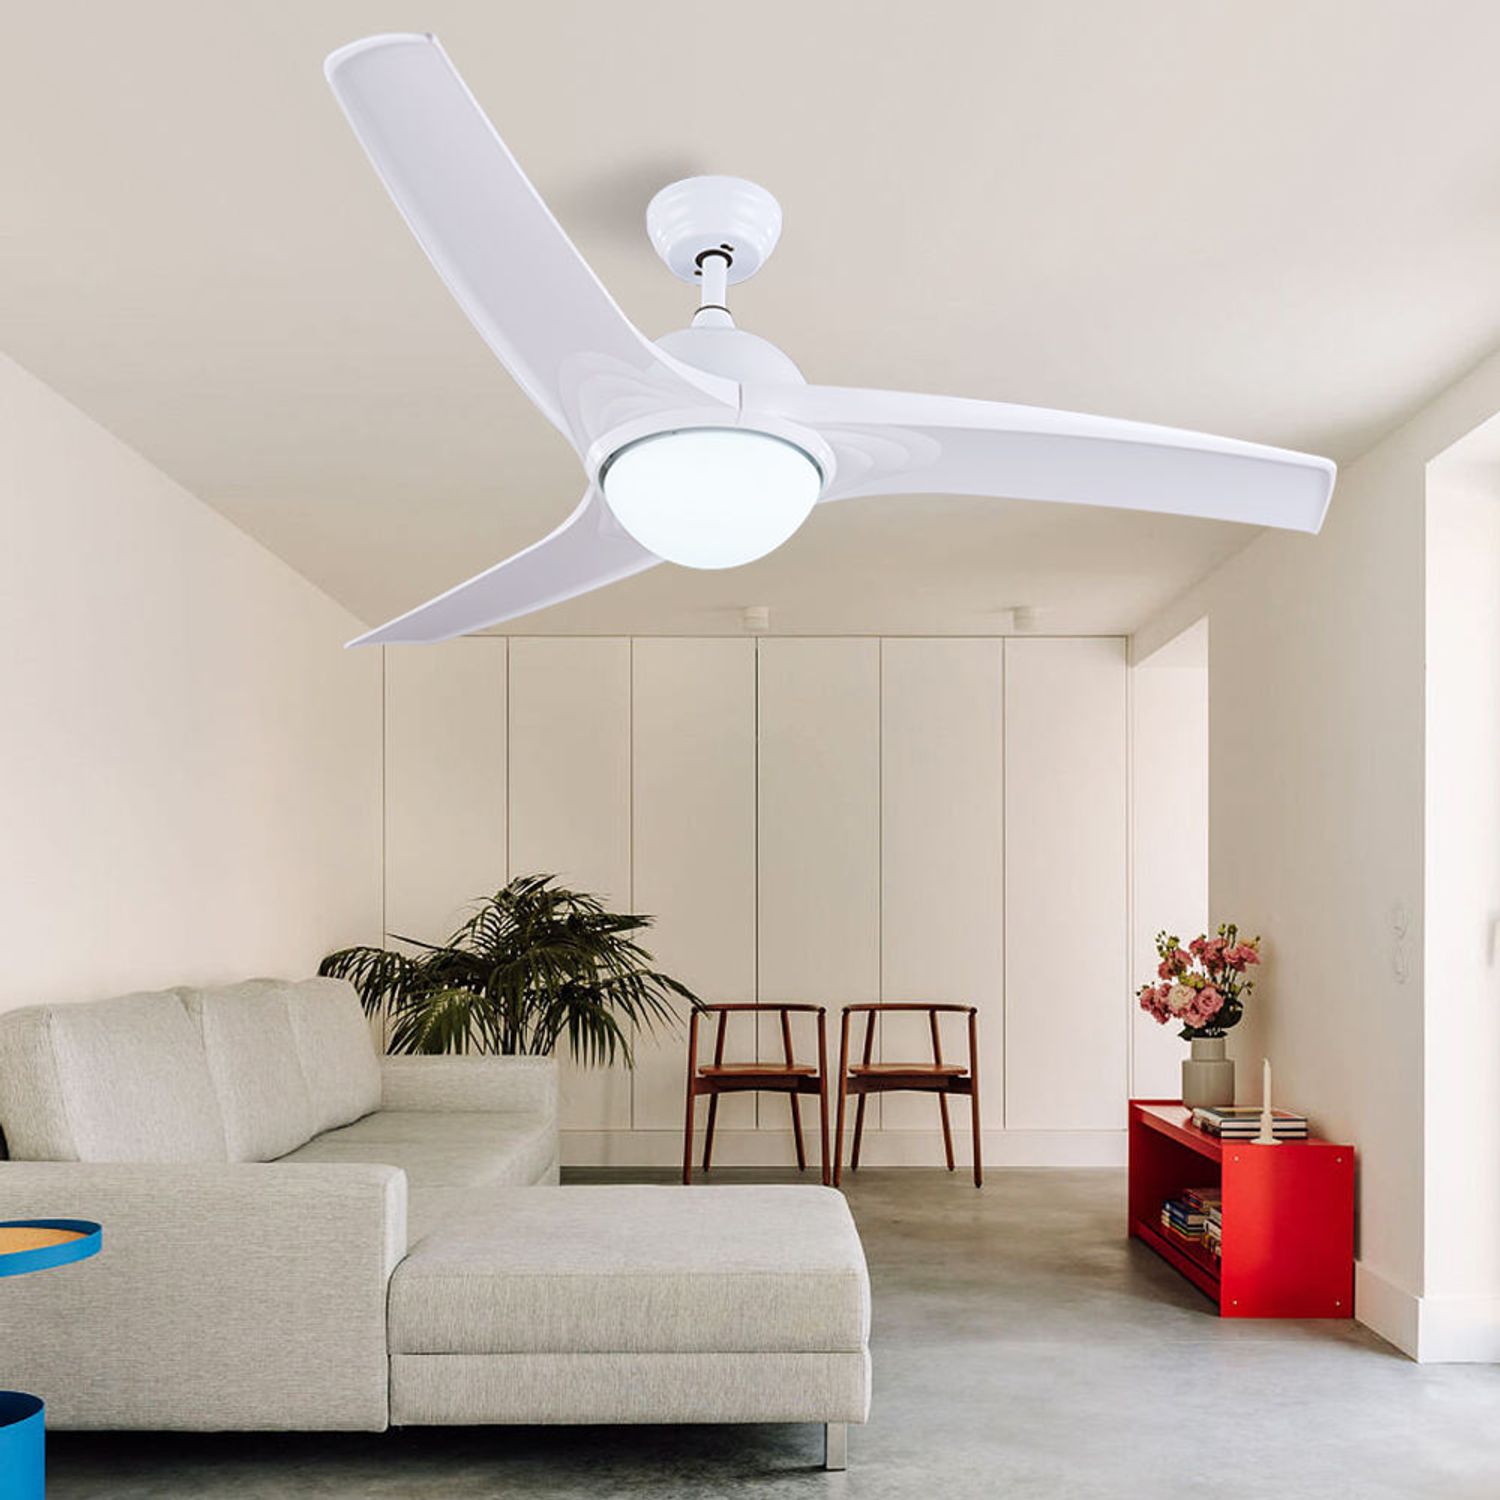 KBS Wholesale all white ABS Blade Ceiling Fan with Light and Remote in a room